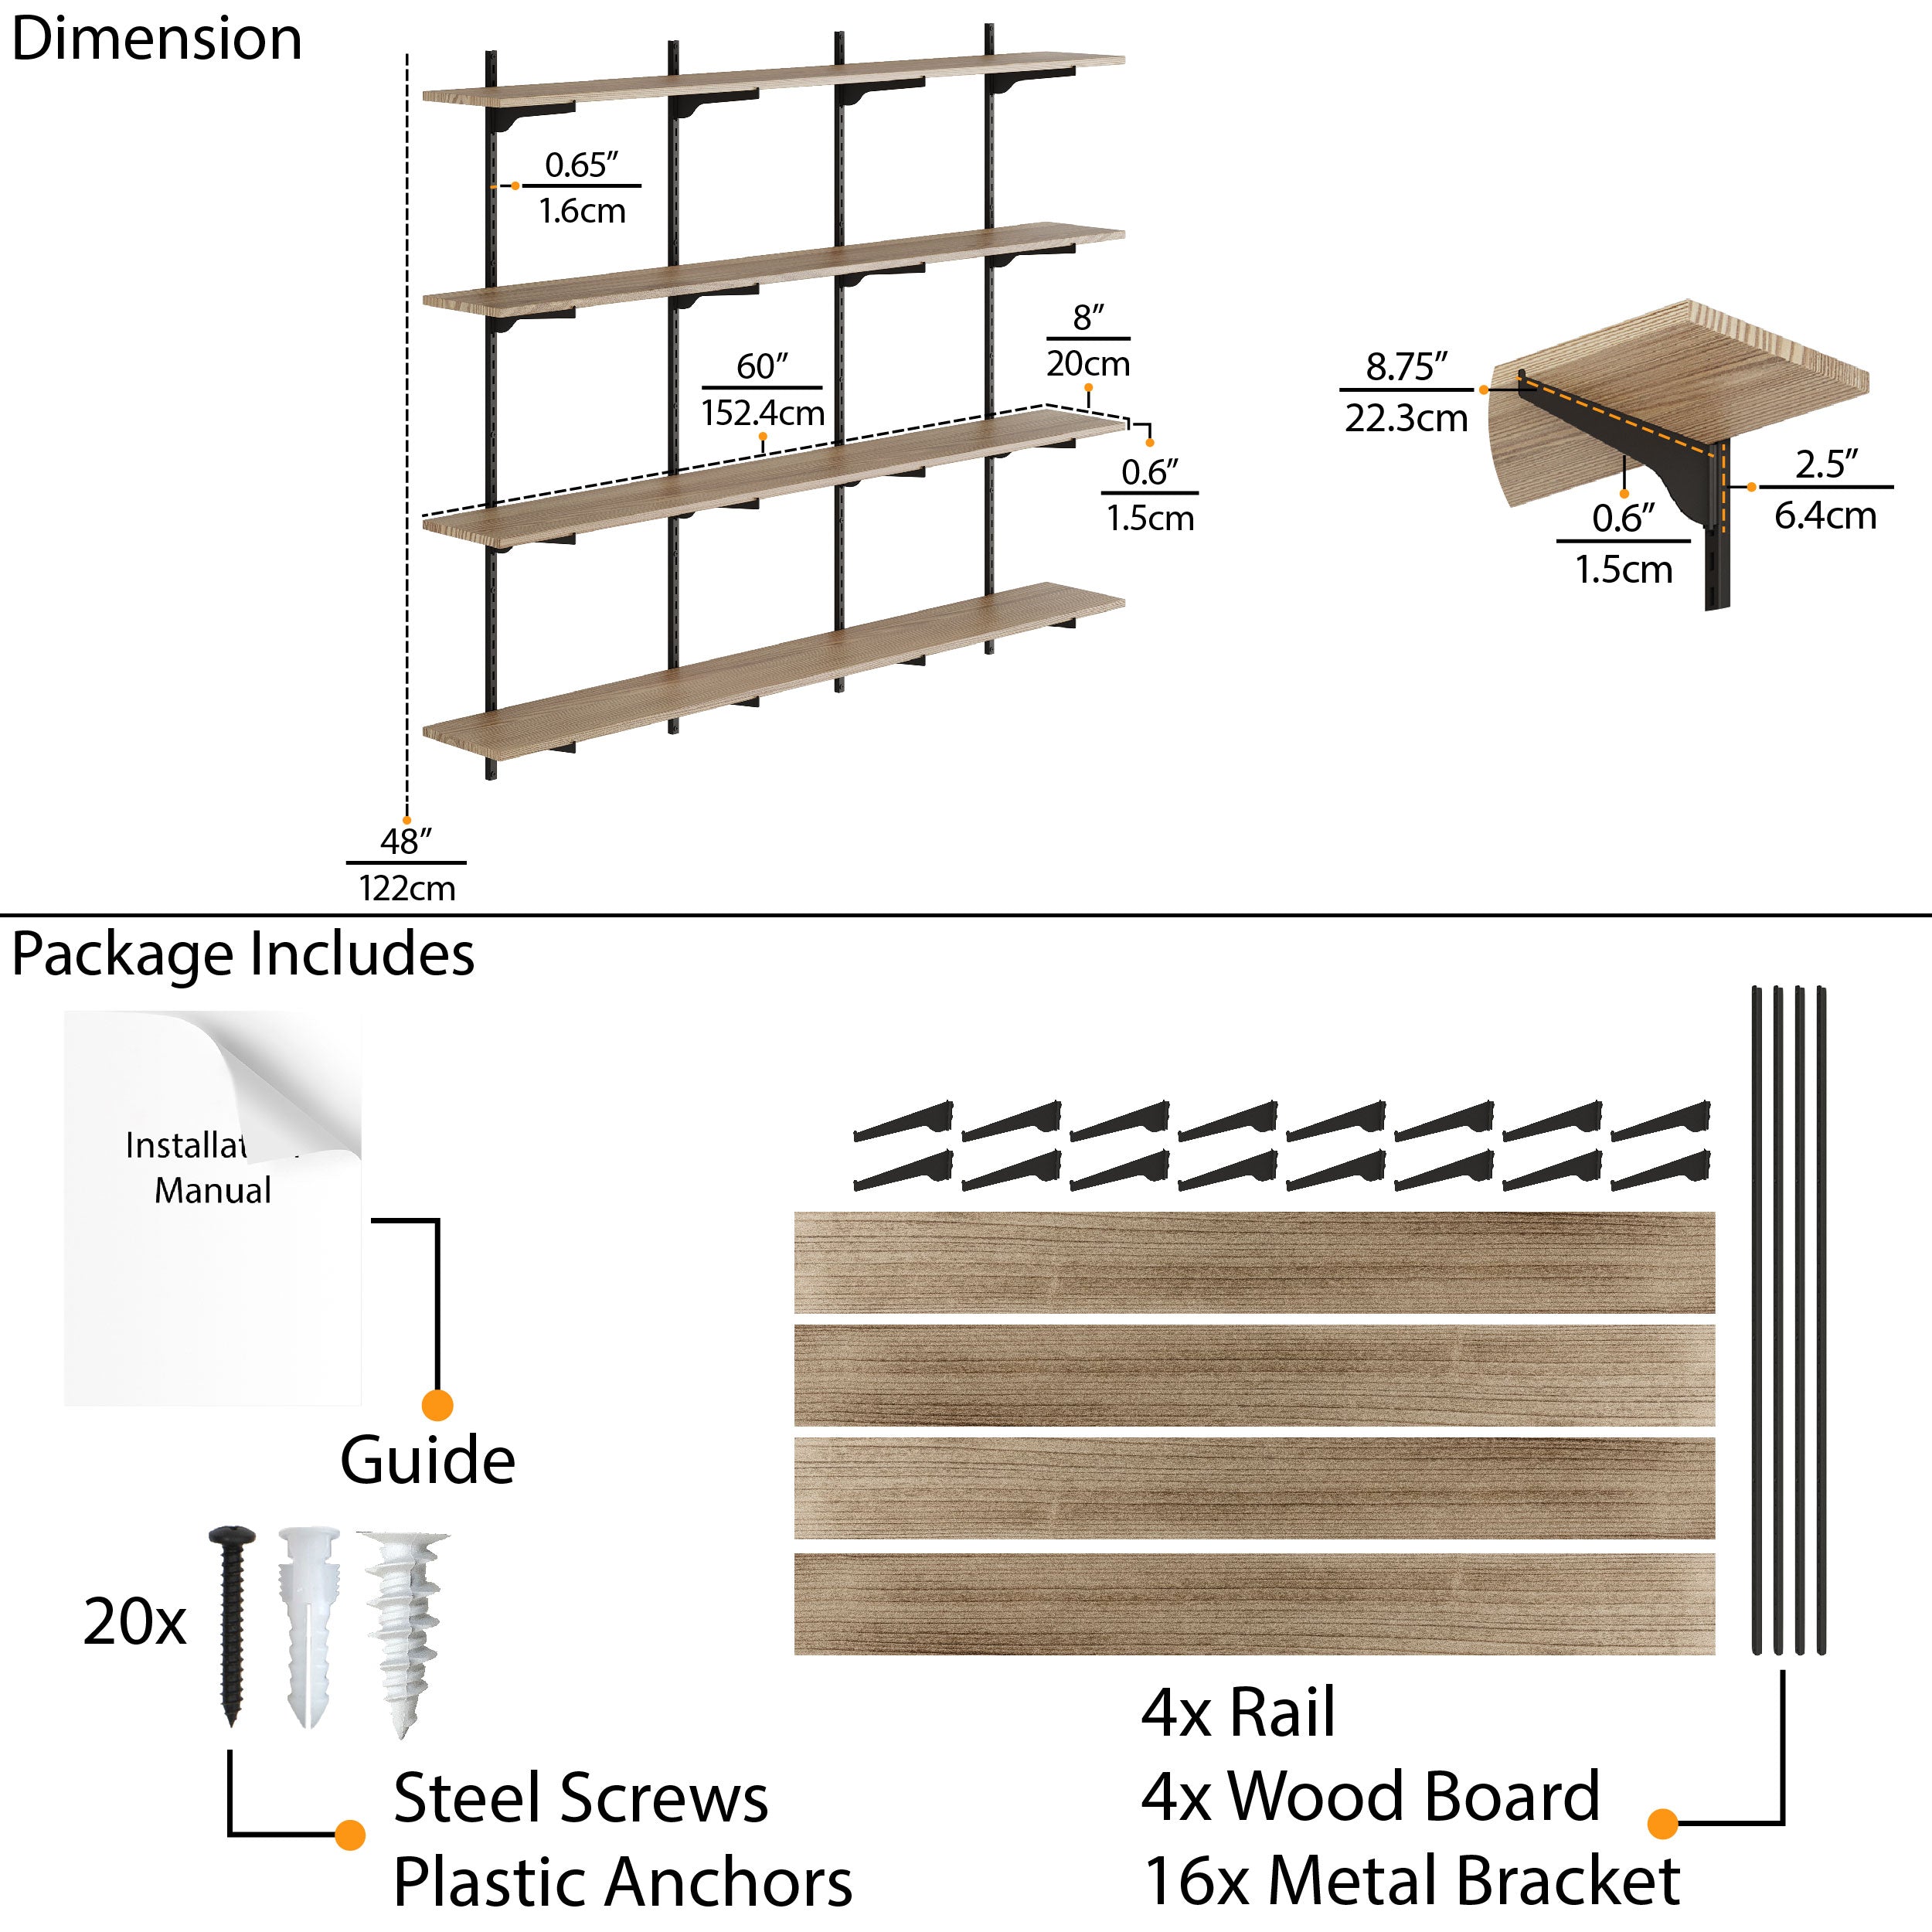 Technical schematic of a 60'' wall storage shelf burnt, showing dimensions, components included in the package such as screws and brackets, useful for installation guidance.